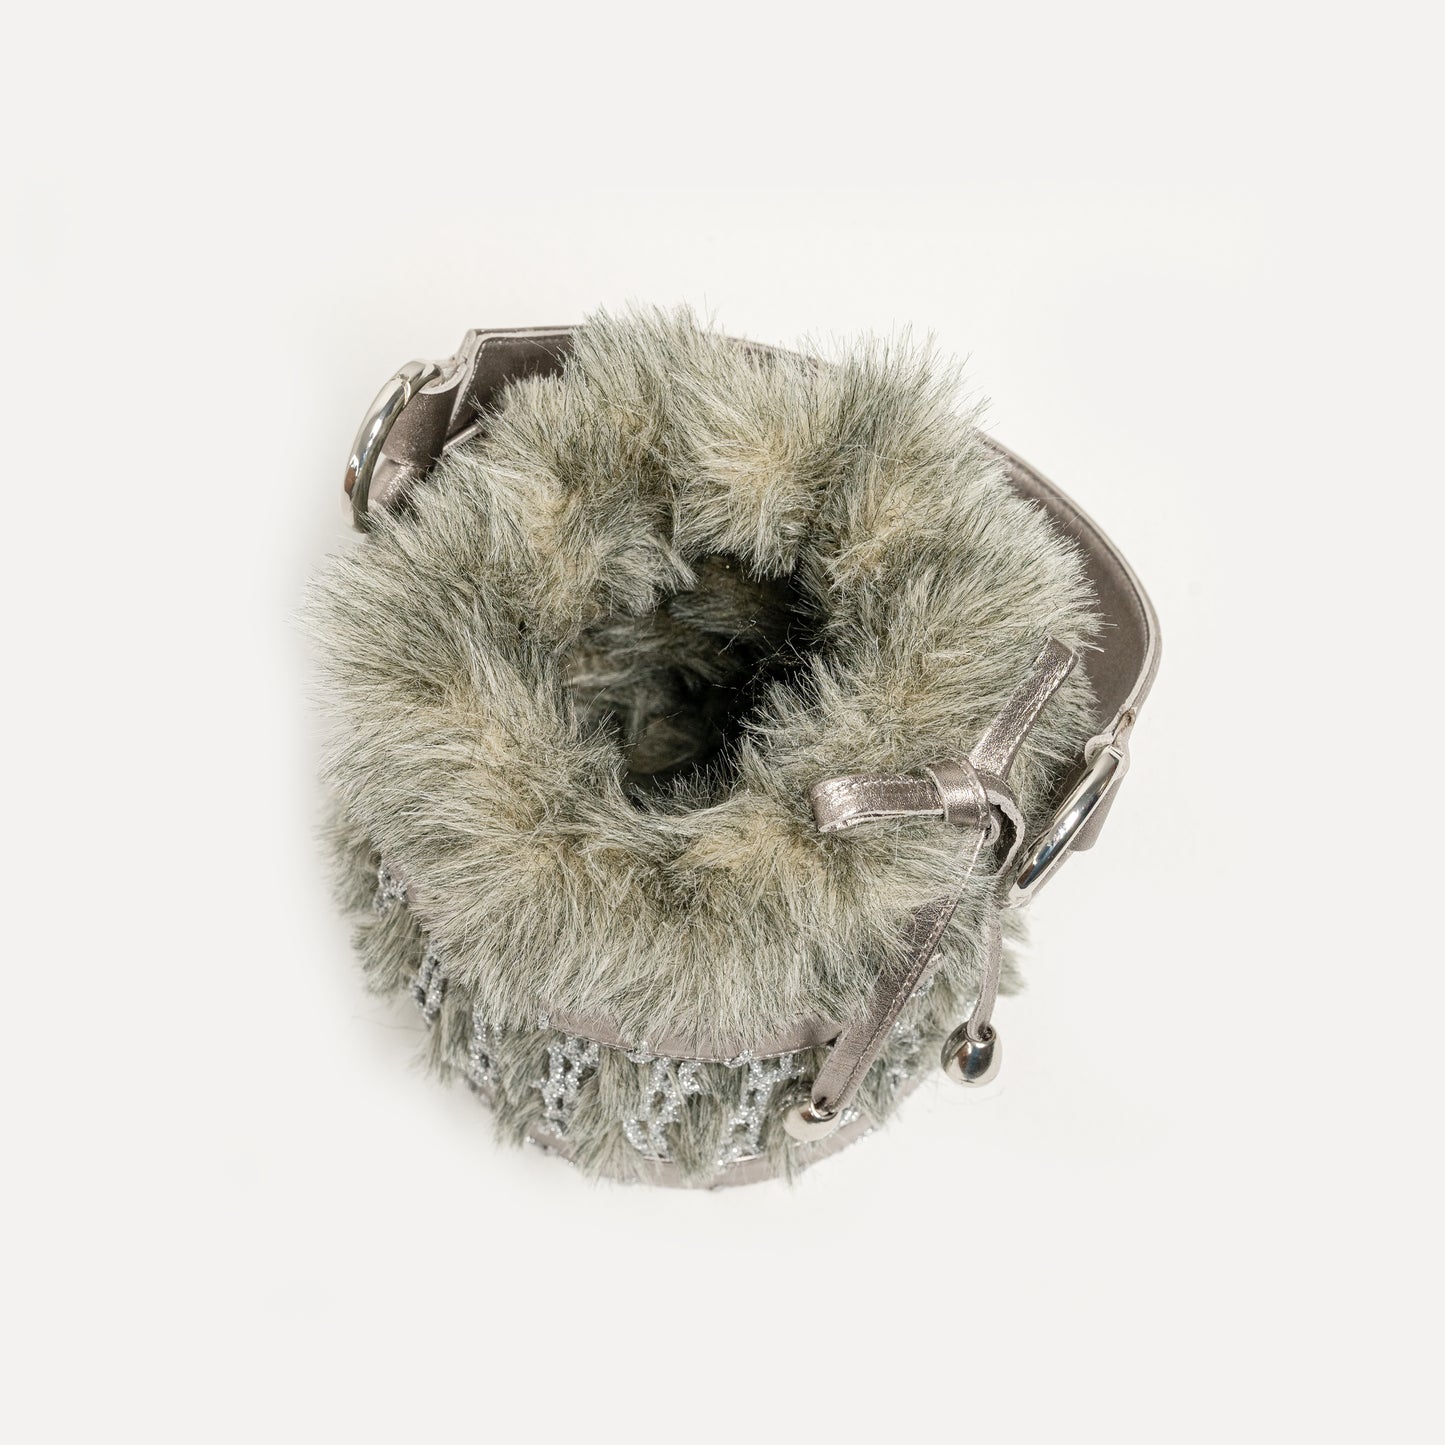 Covelinhas - bag in leather and crochet in bronze and gray faux fur